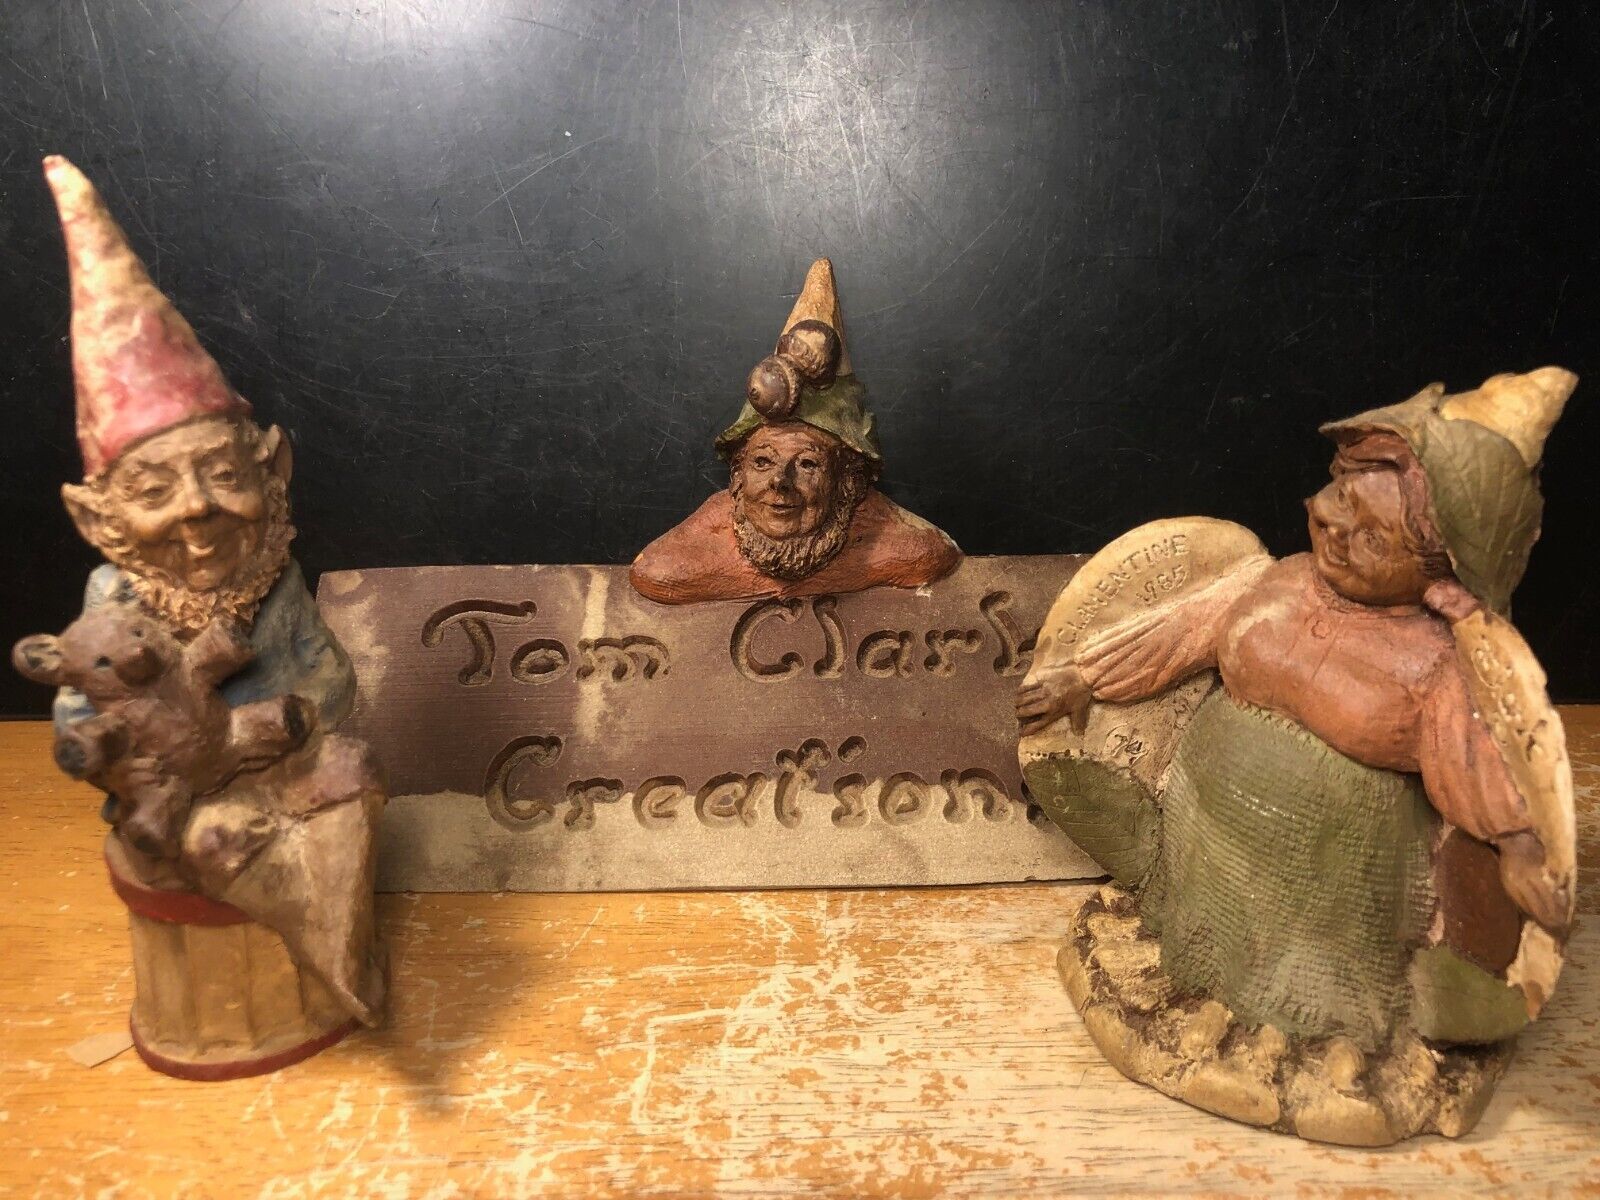 Vintage Tom Clark’s Creations Gnome 1980's Lot of 3